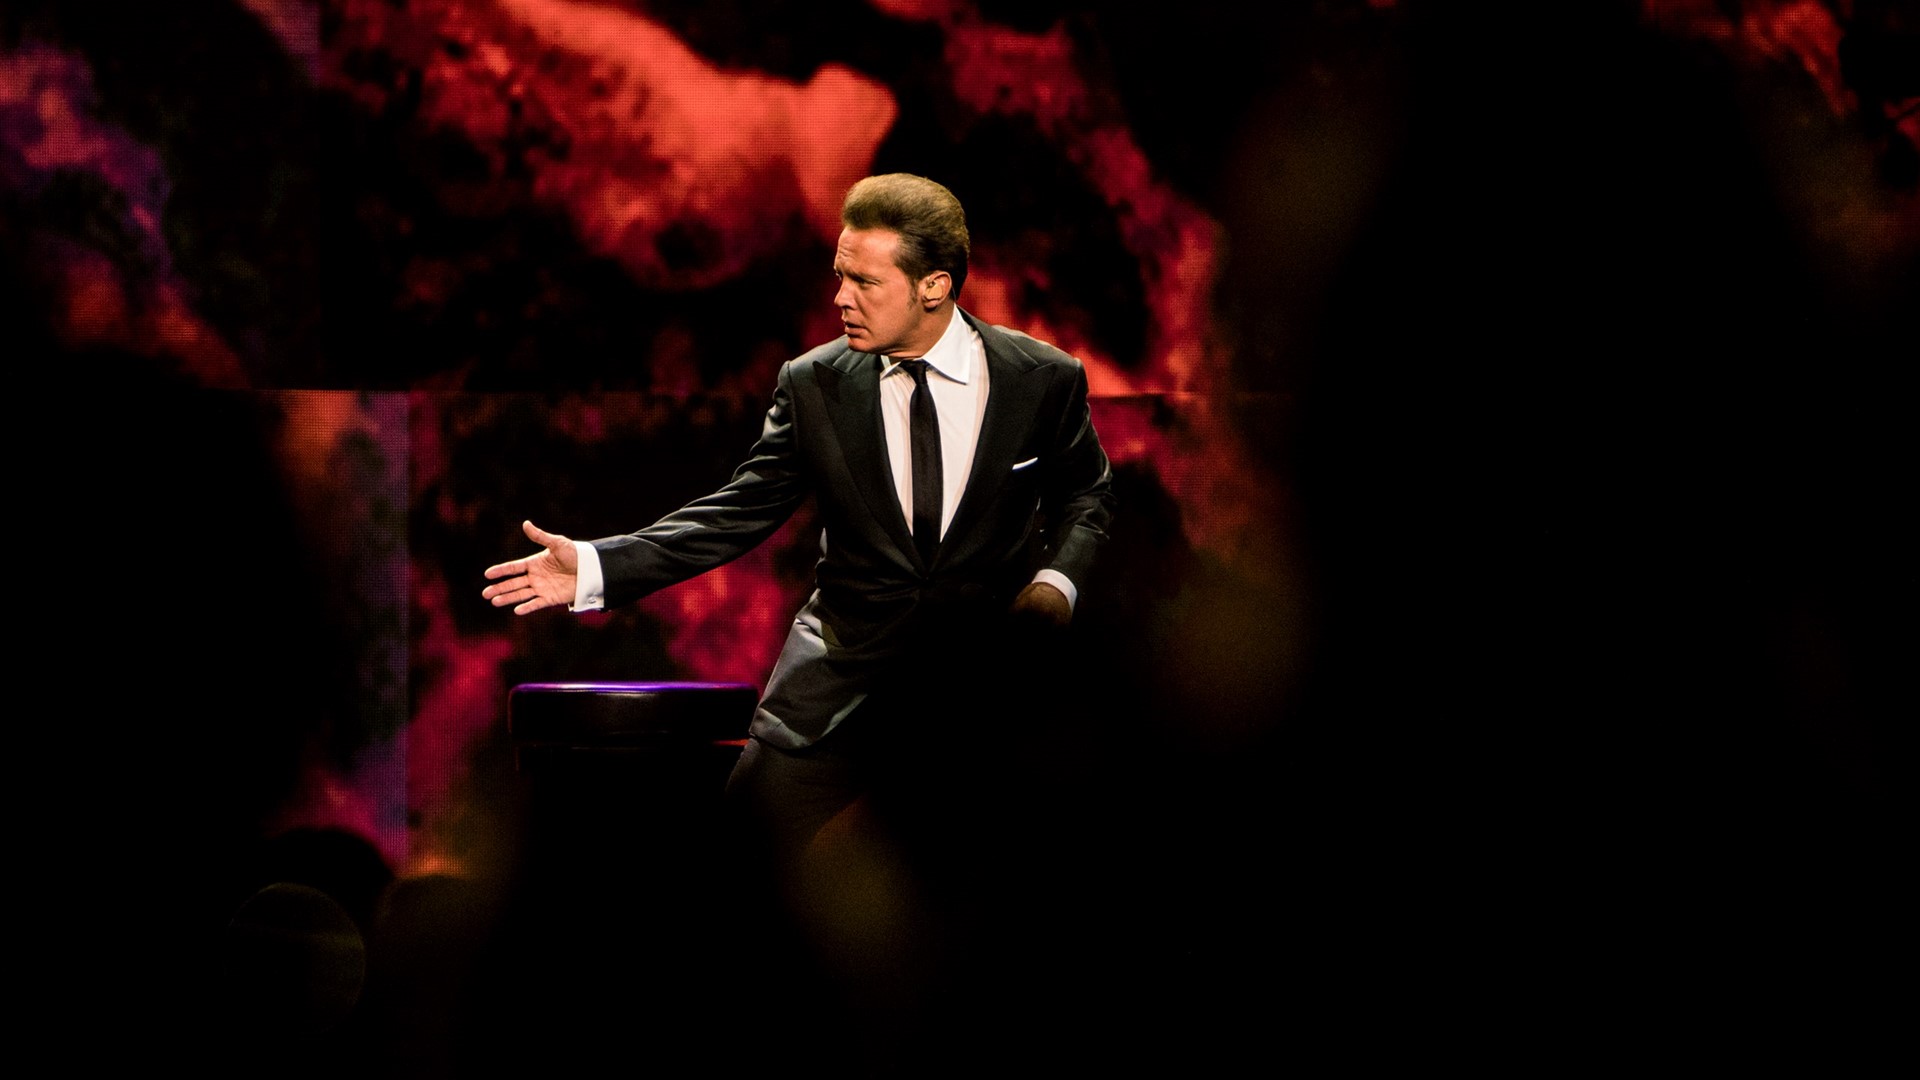 Luis Miguel, one of the most successful artists in Latin American history, performs at The Colosseum at Caesars Palace